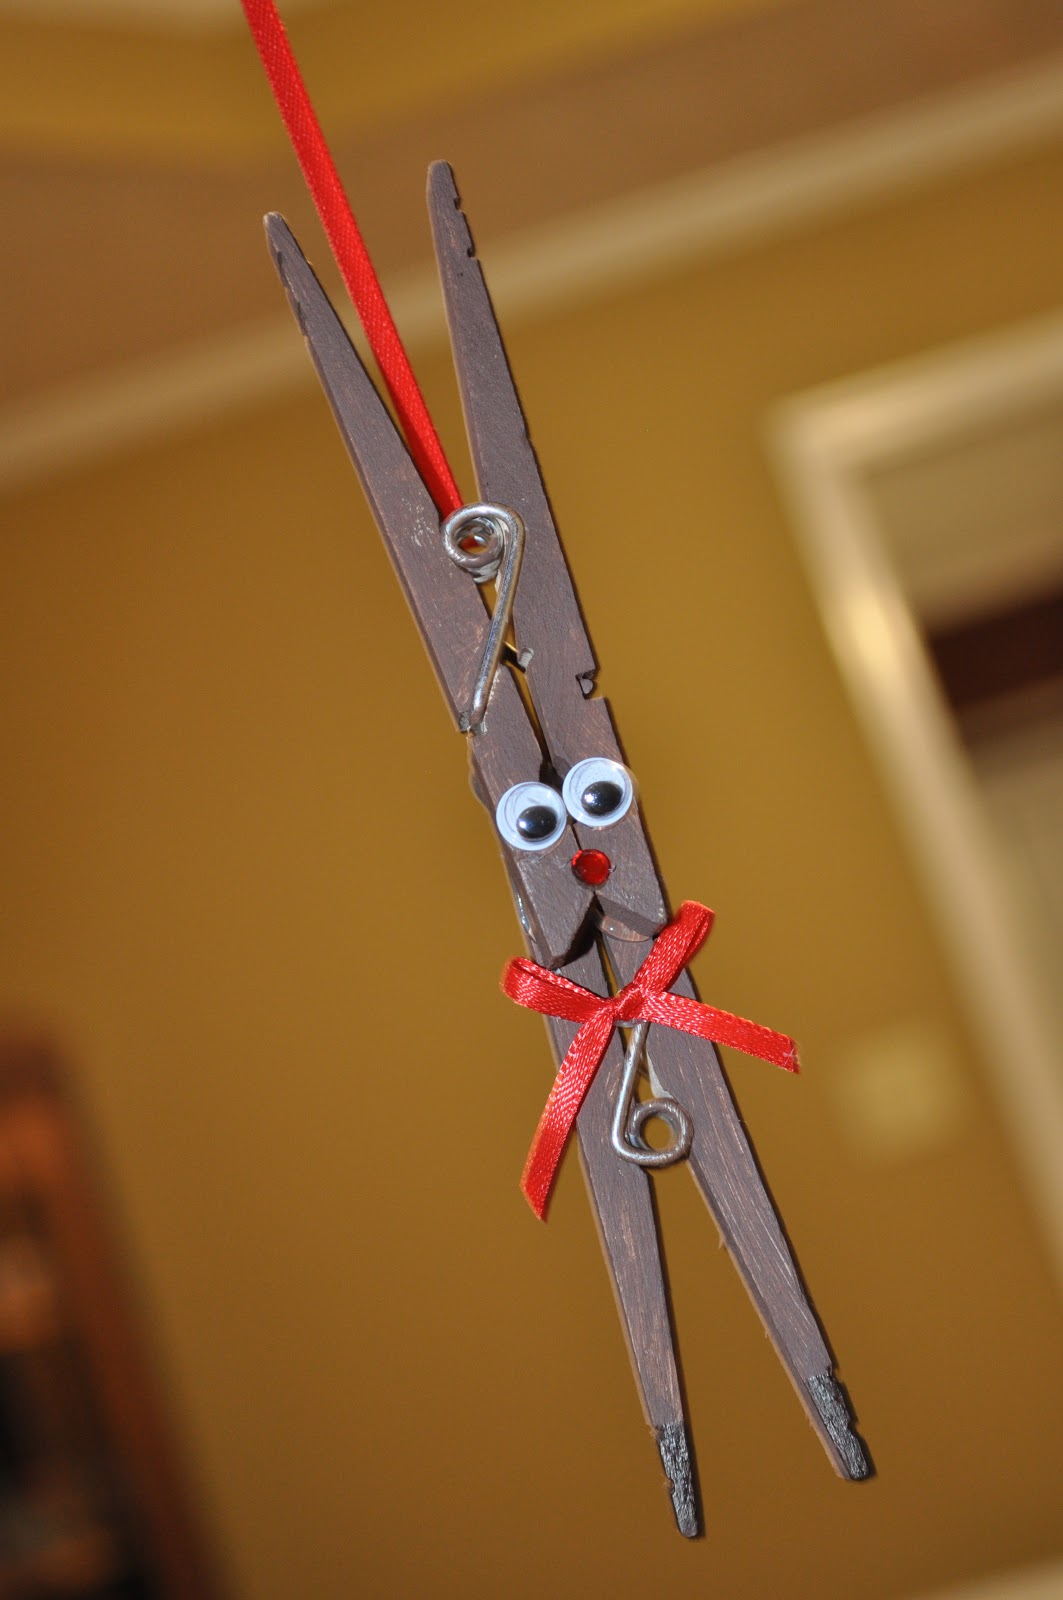 The Crafty Crystal: 12 Days of Christmas Crafts #2: Clothespin Reindeer